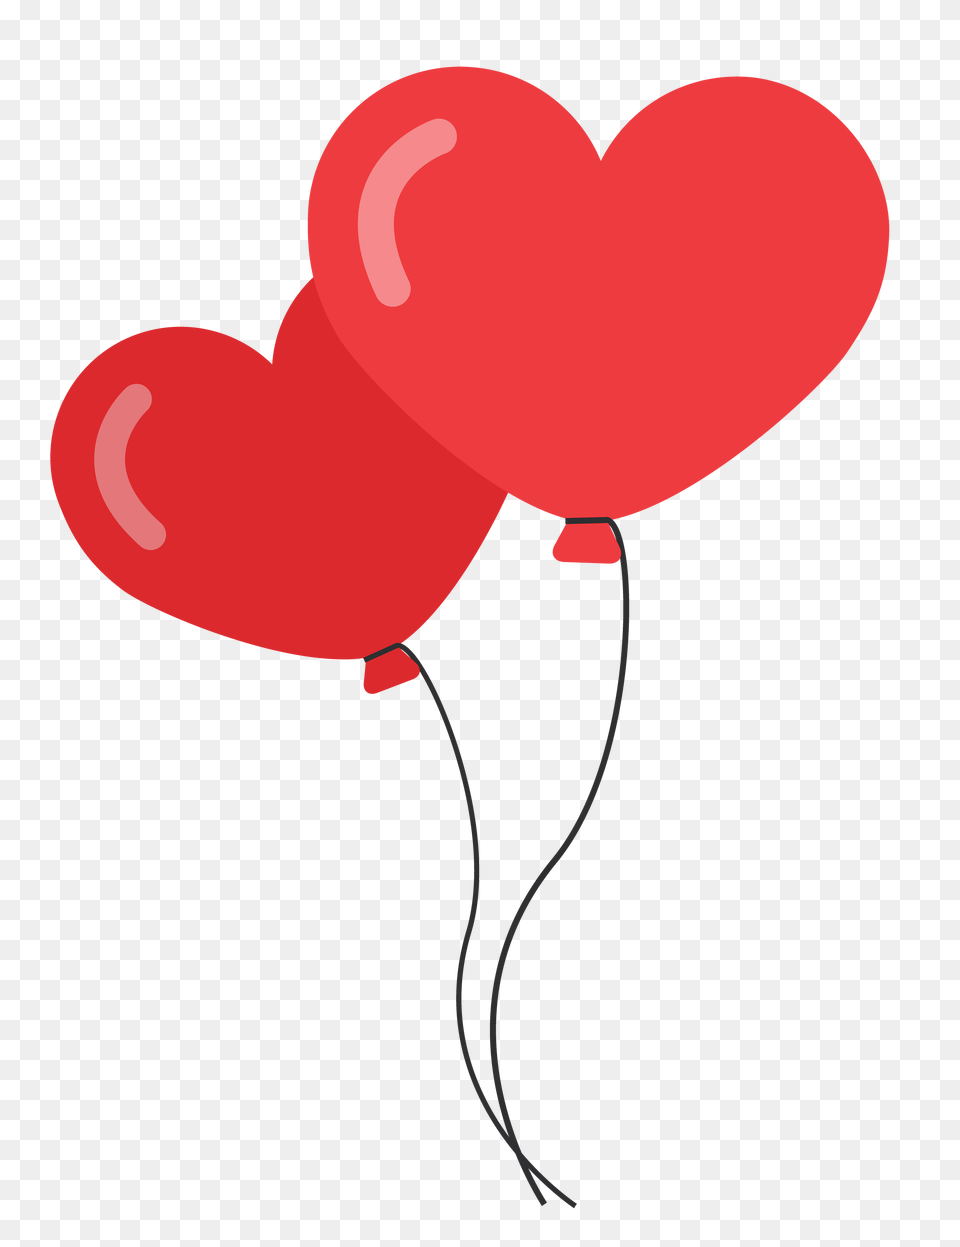 Heart Shaped Balloons Image Dlpngcom Heart Shaped Balloons, Flower, Plant, Carnation, Rose Free Png Download